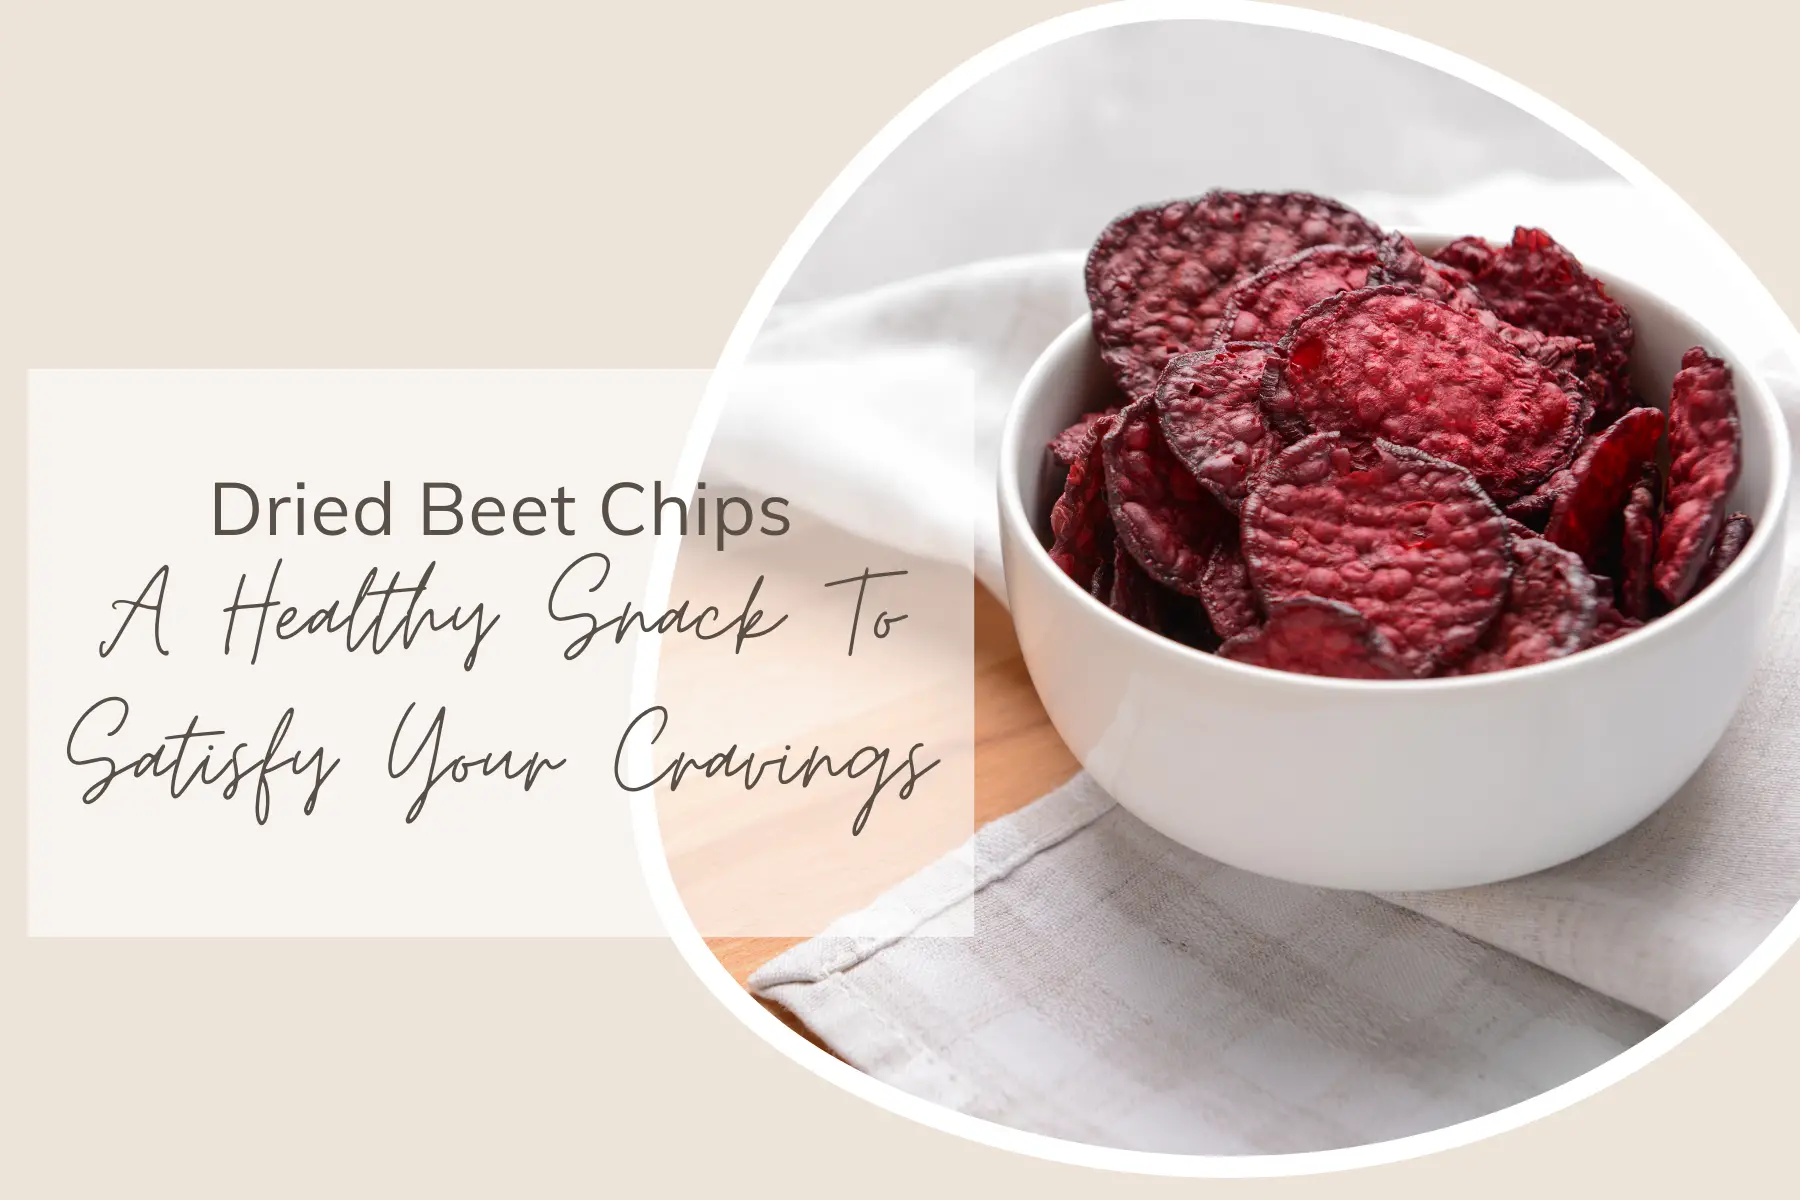 Dried Beet Chips - A Healthy Snack To Satisfy Your Cravings